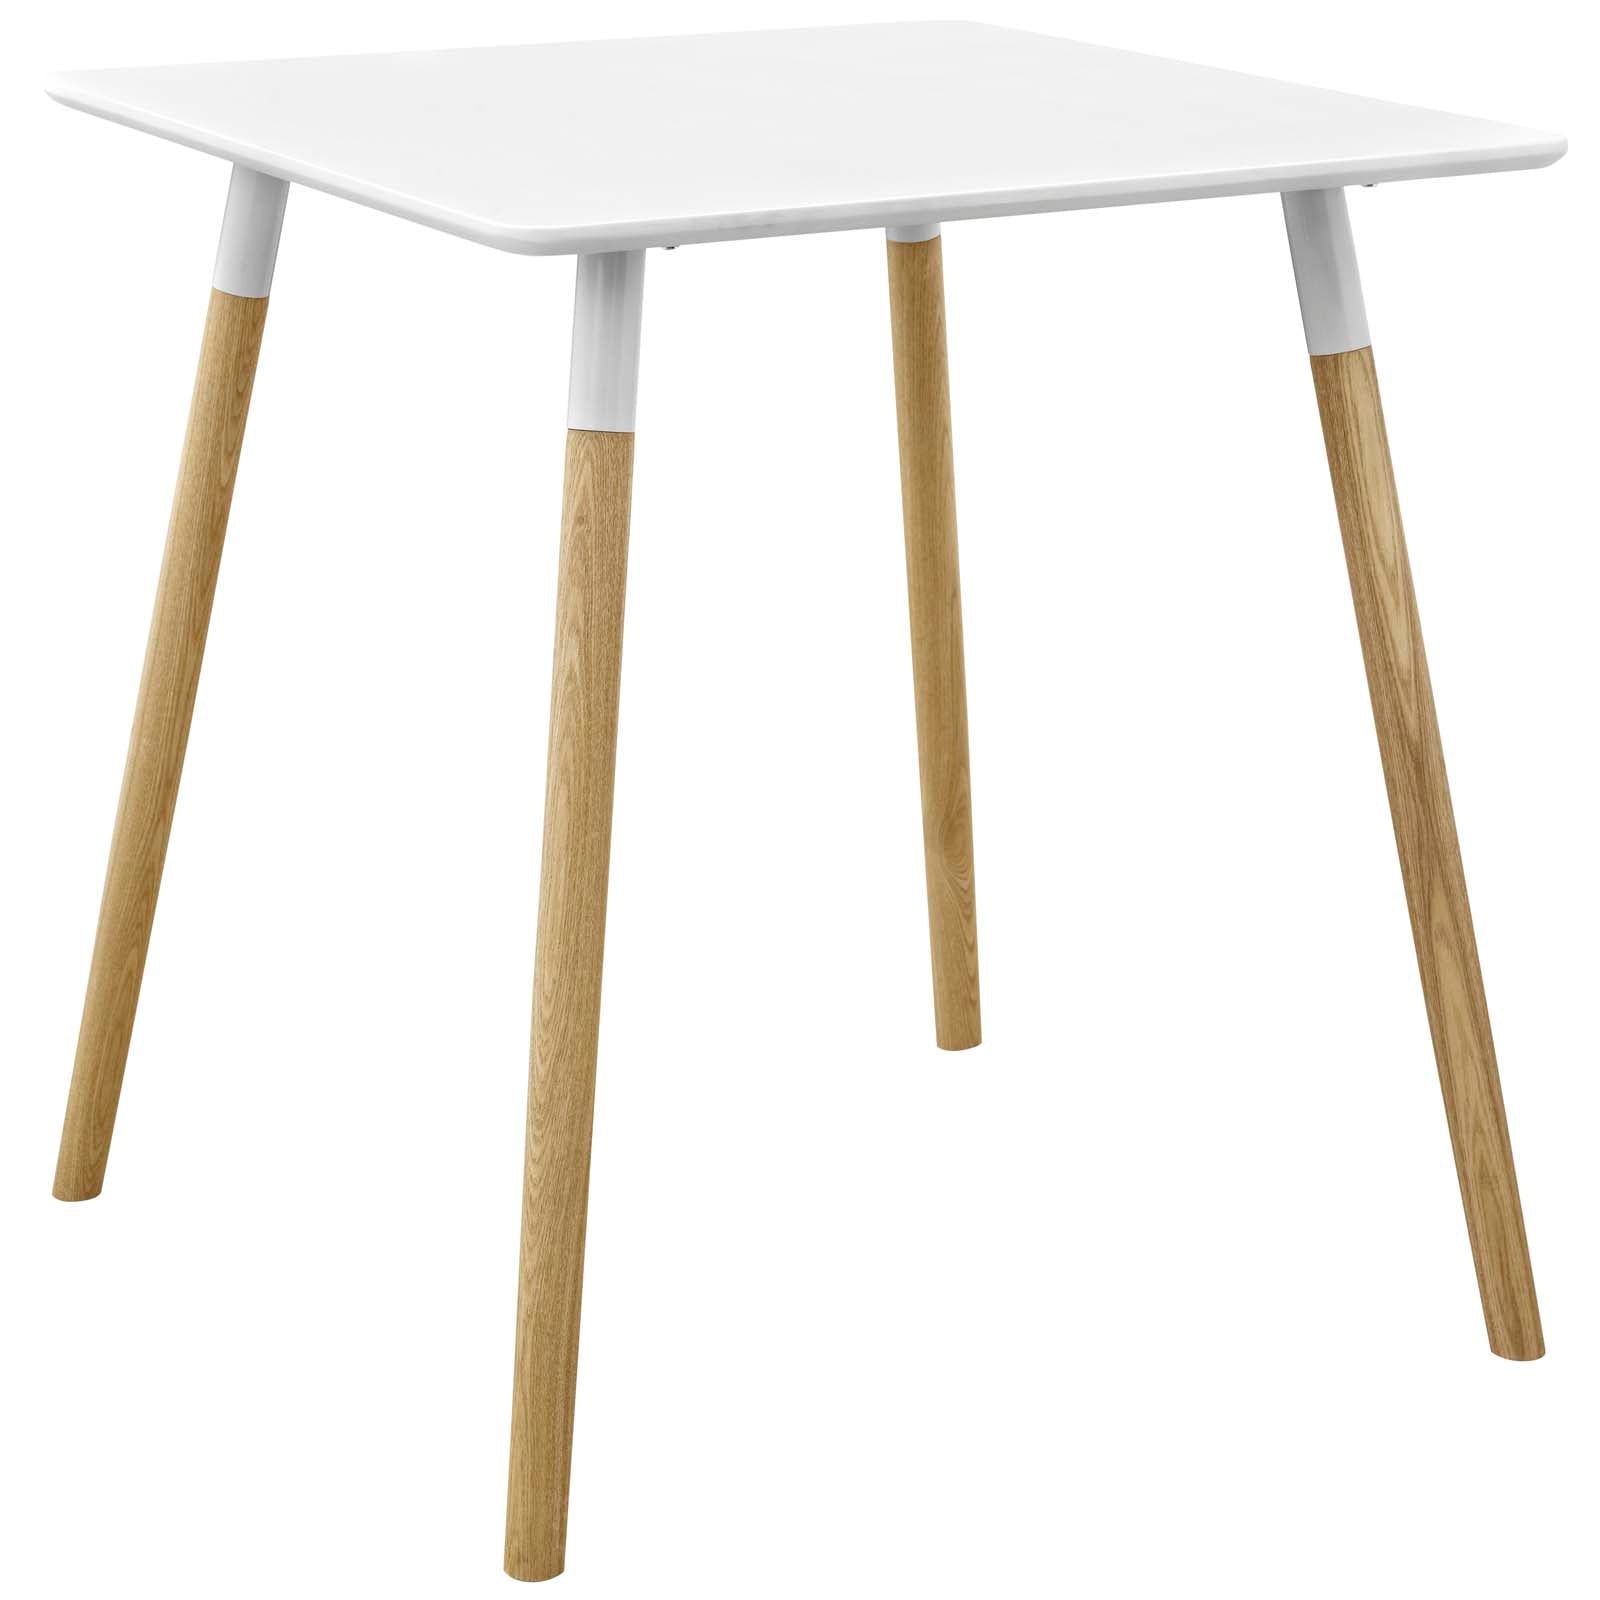 Modway Dining Tables - Continuum Square Dining Table White